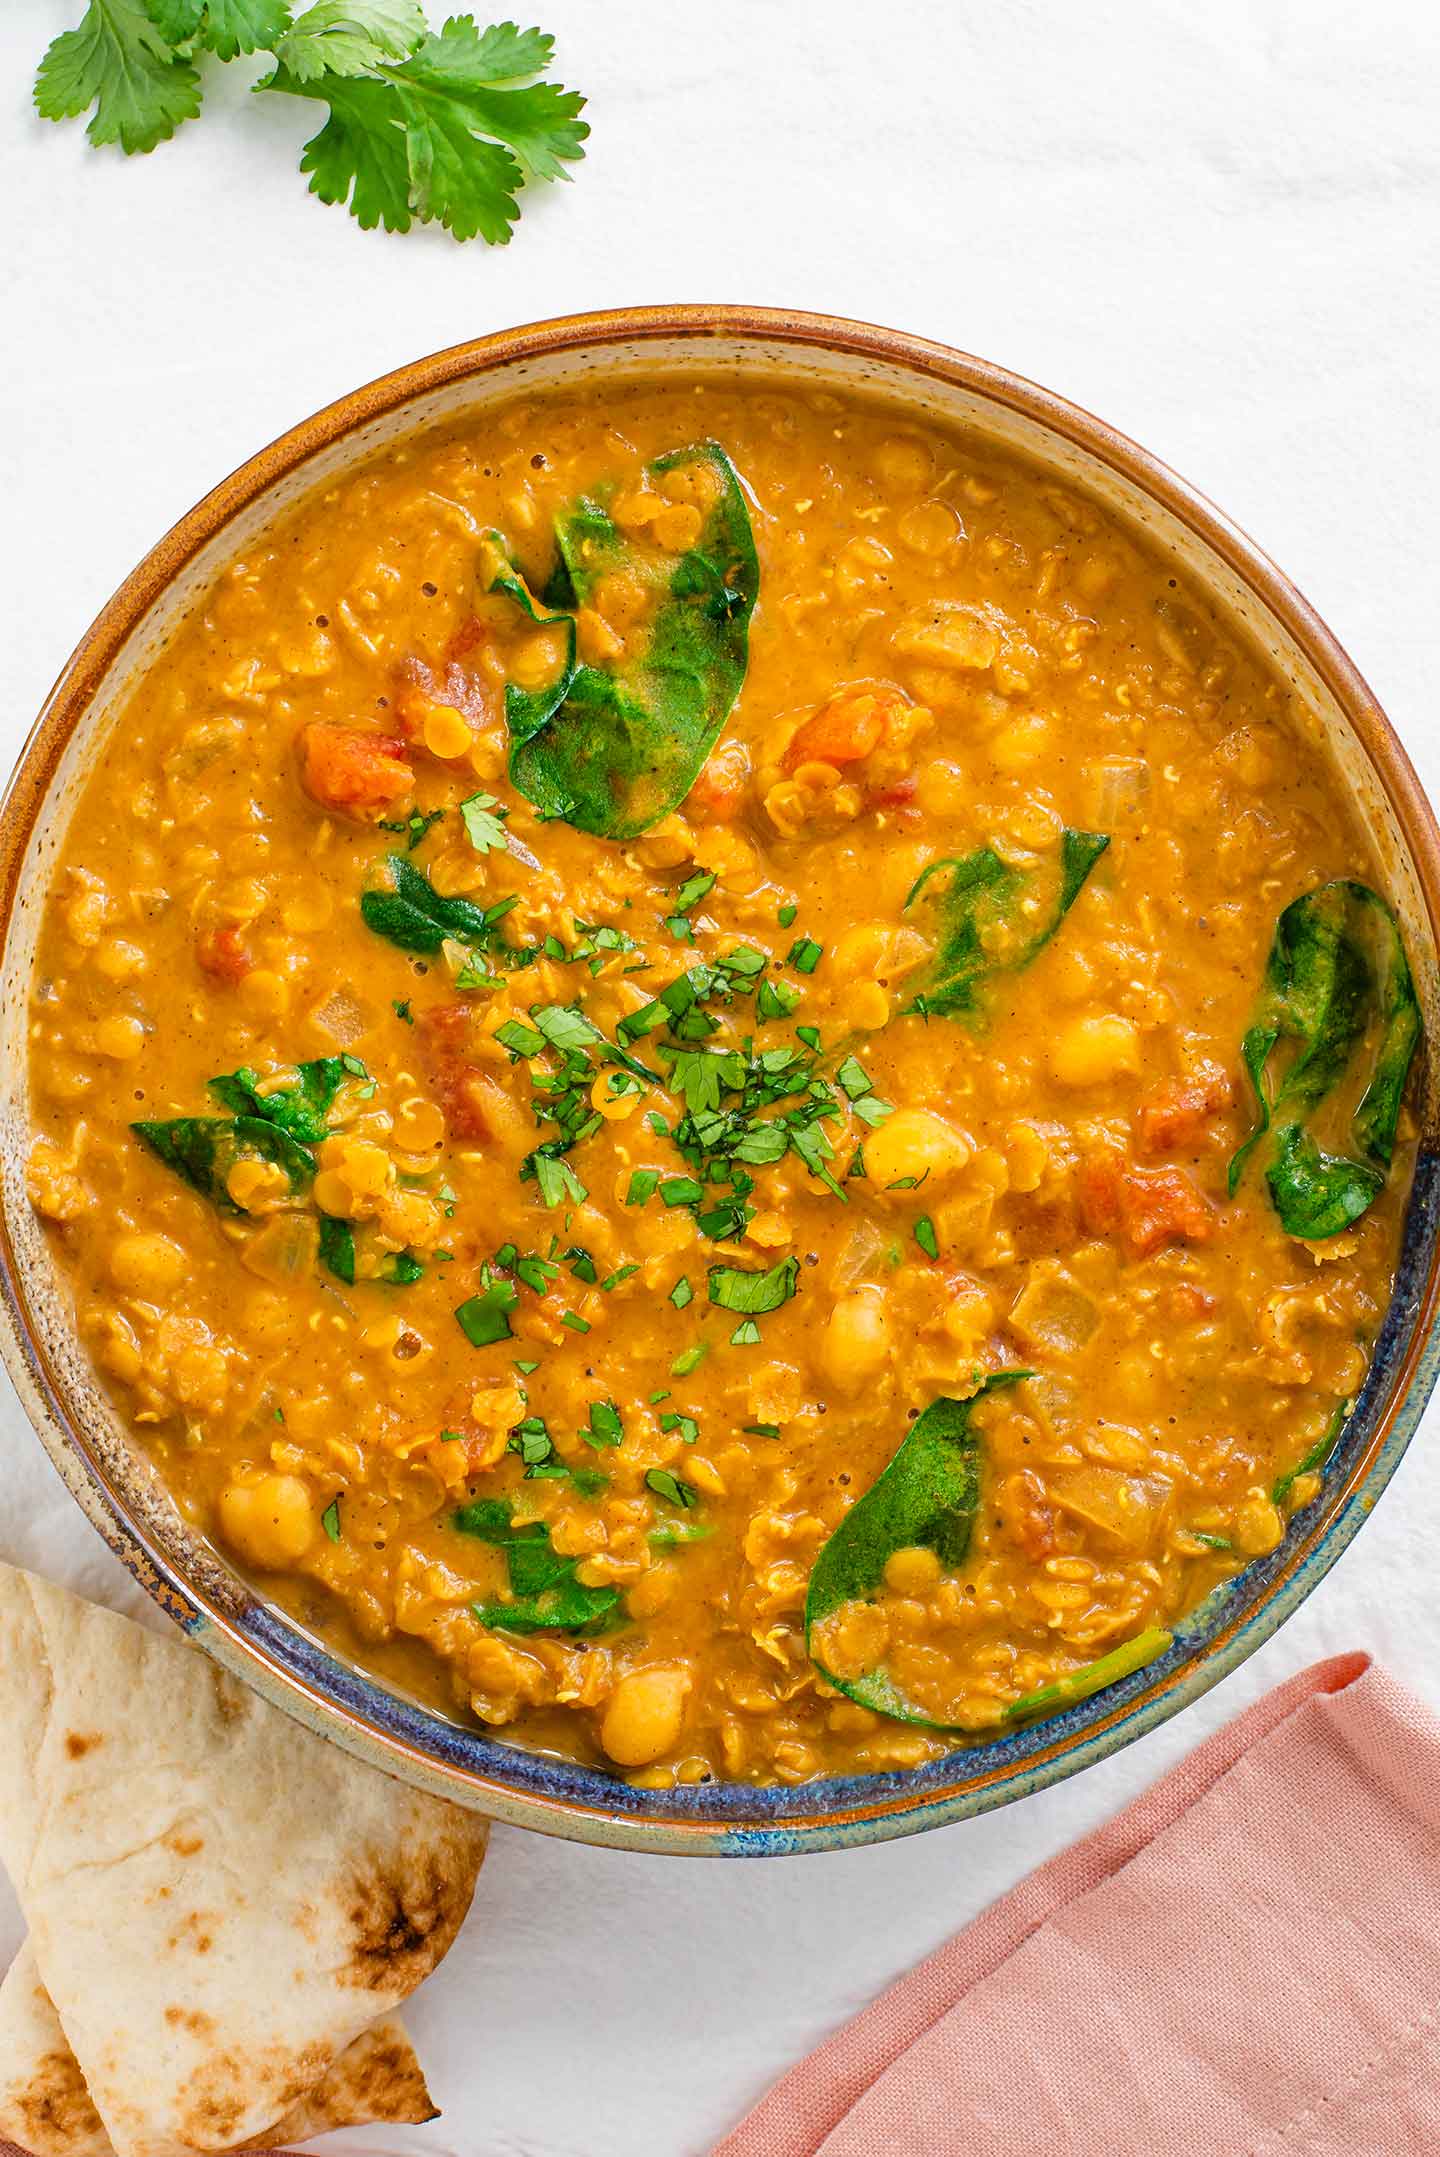 Top down view of a bowl of vegan red lentil curry. Spinach, tomatoes, and chickpeas are visible in the thick red lentil curry.